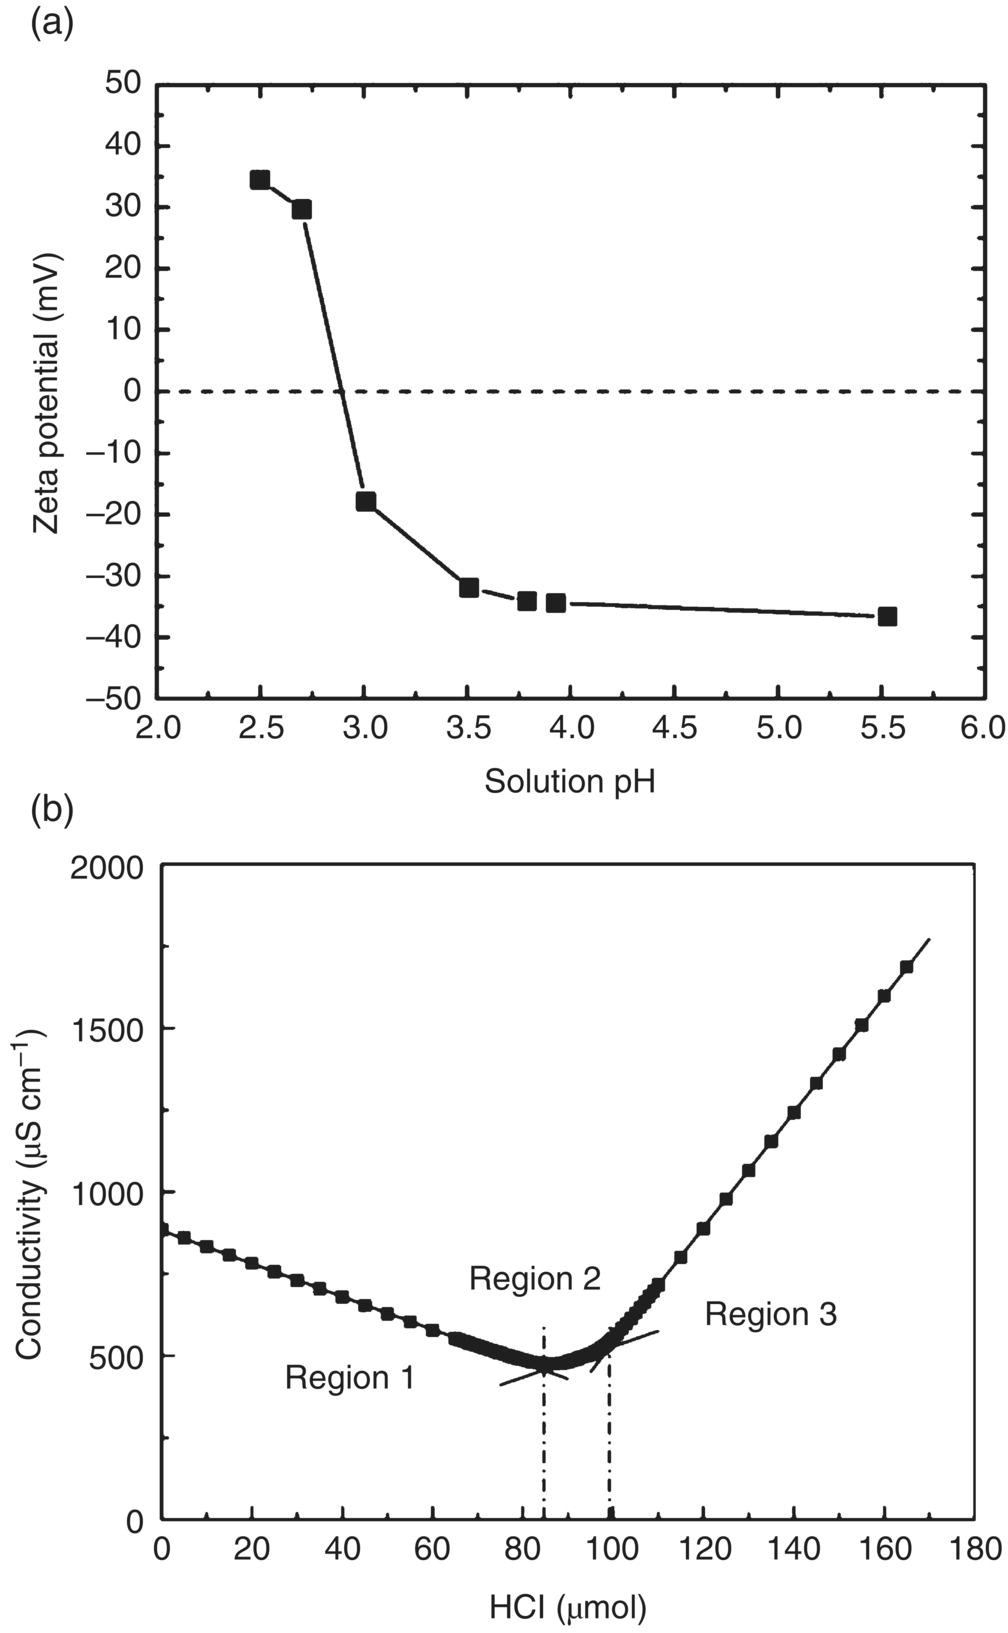 Graph of zeta potentials of oxidative‐acid‐treated NDs vs. solution pH displaying a descending curve with solid square markers (top); and a graph displaying a typical backward titration curve with regions 1, 2, and 3 (bottom).